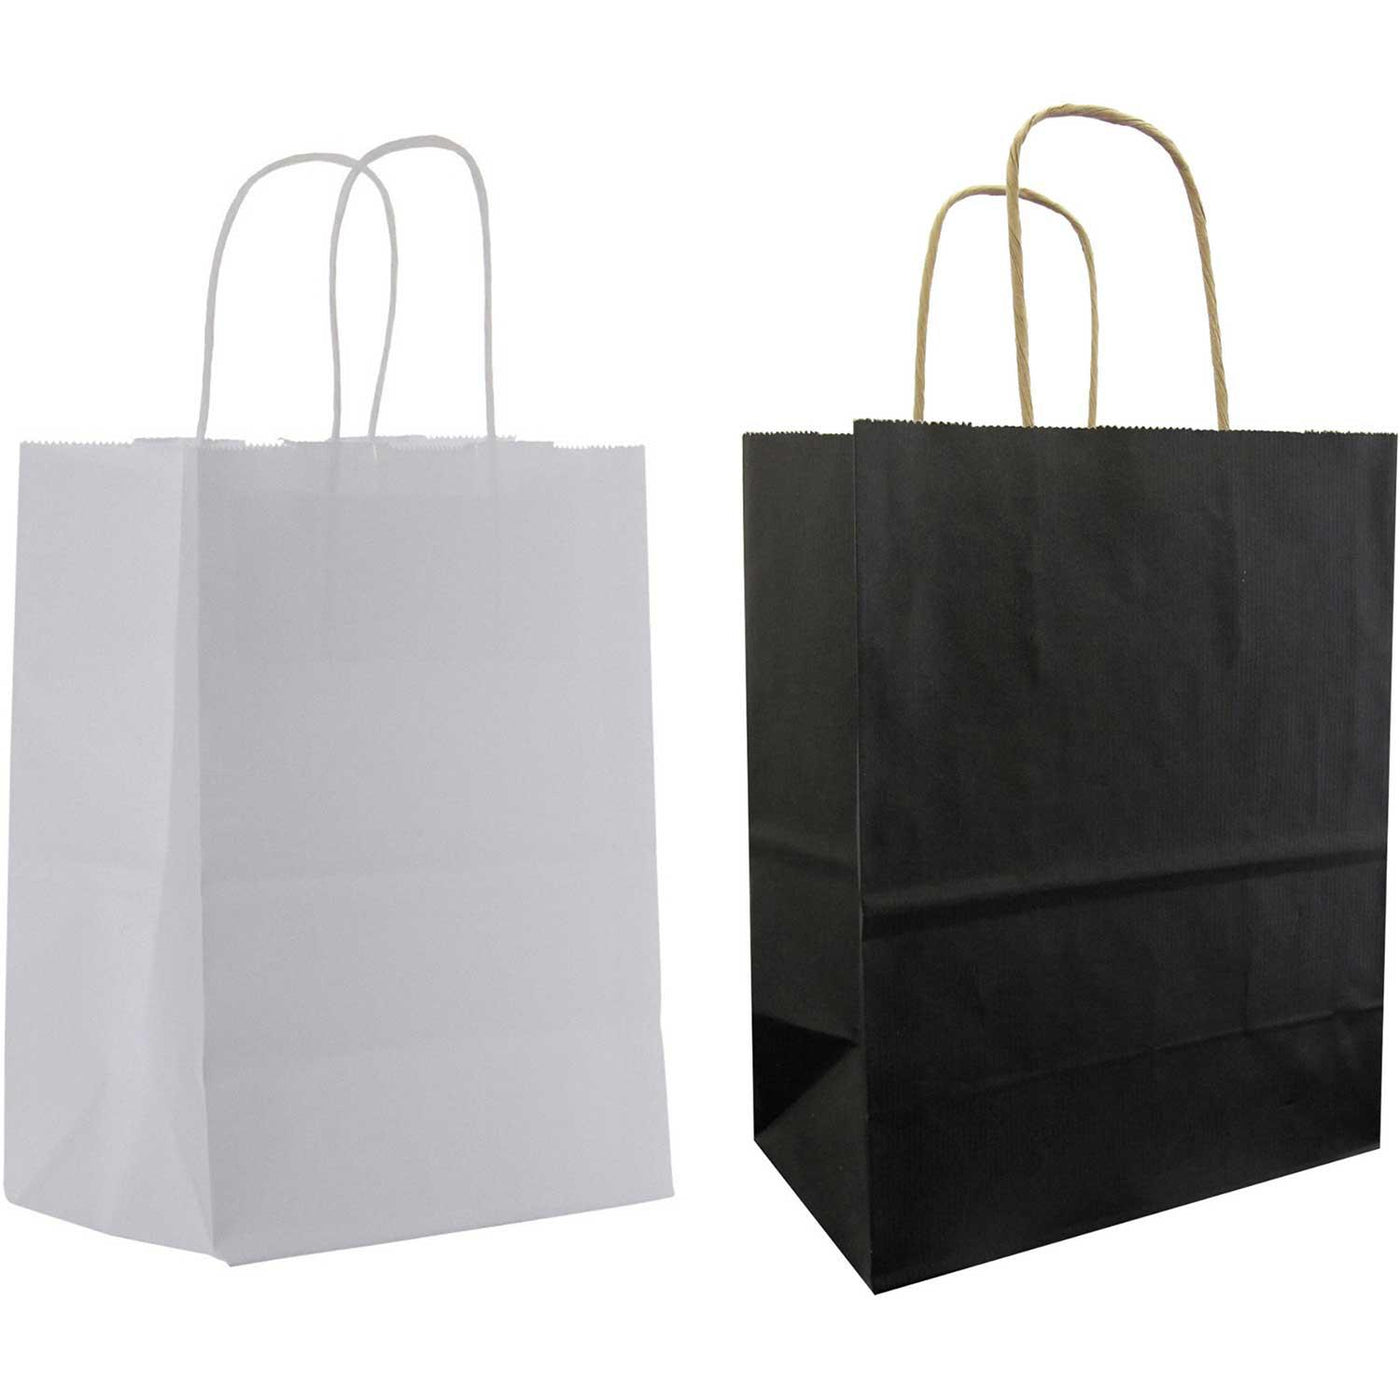 All Occasion Black & White Kraft Medium Solid Totes (12 Pack) by Present Paper - Vysn